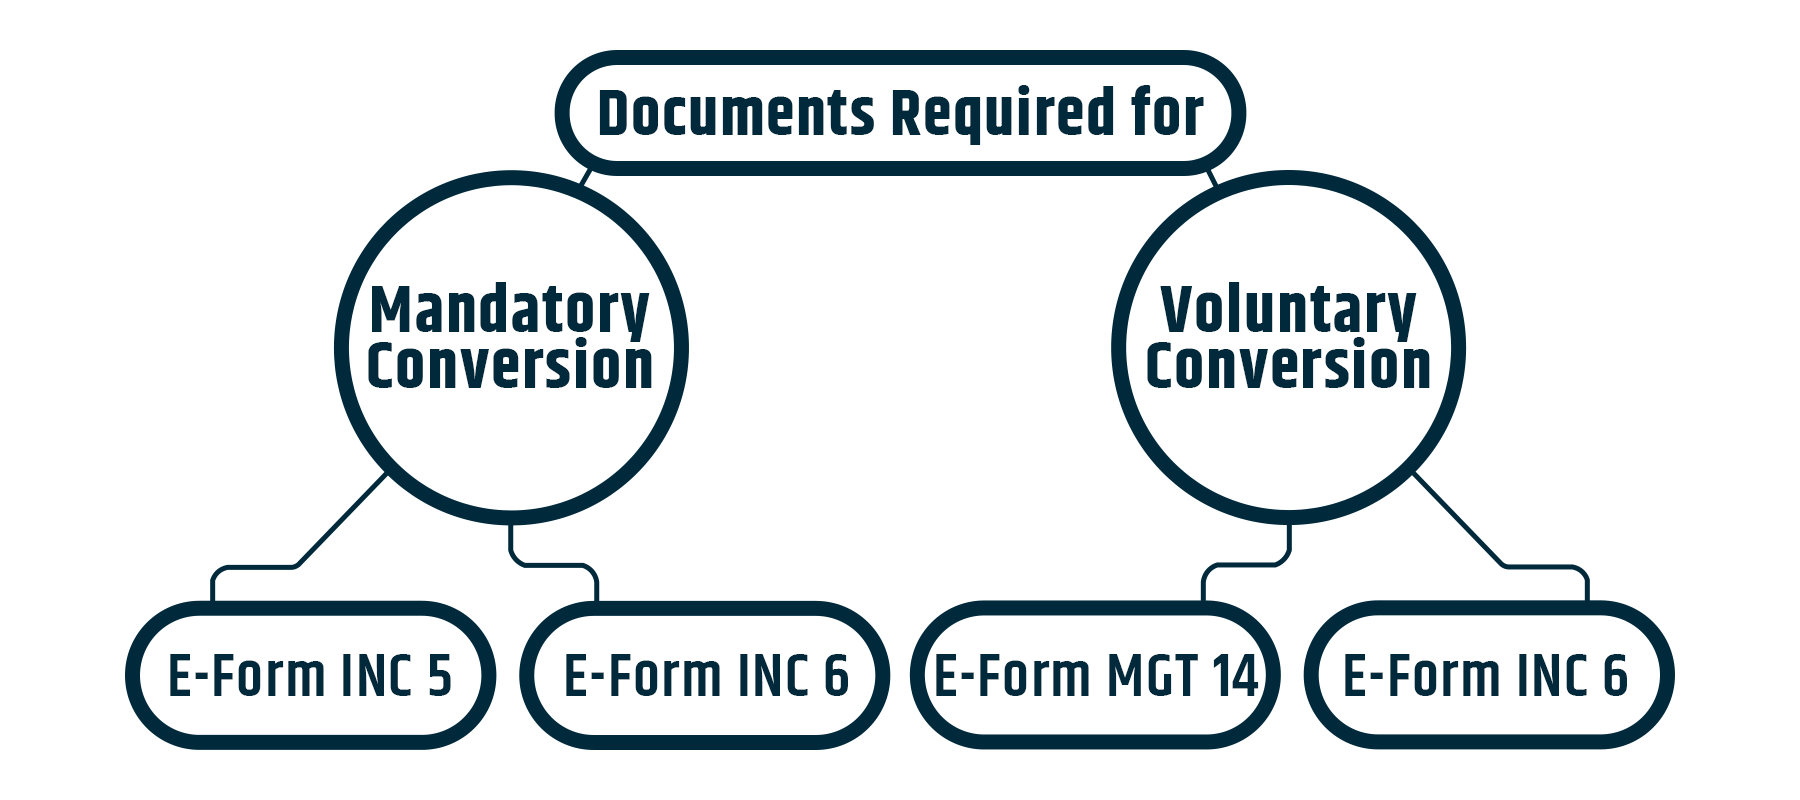  there are two types of Conversion and both require different documents for converting a one-person company to a private limited company.